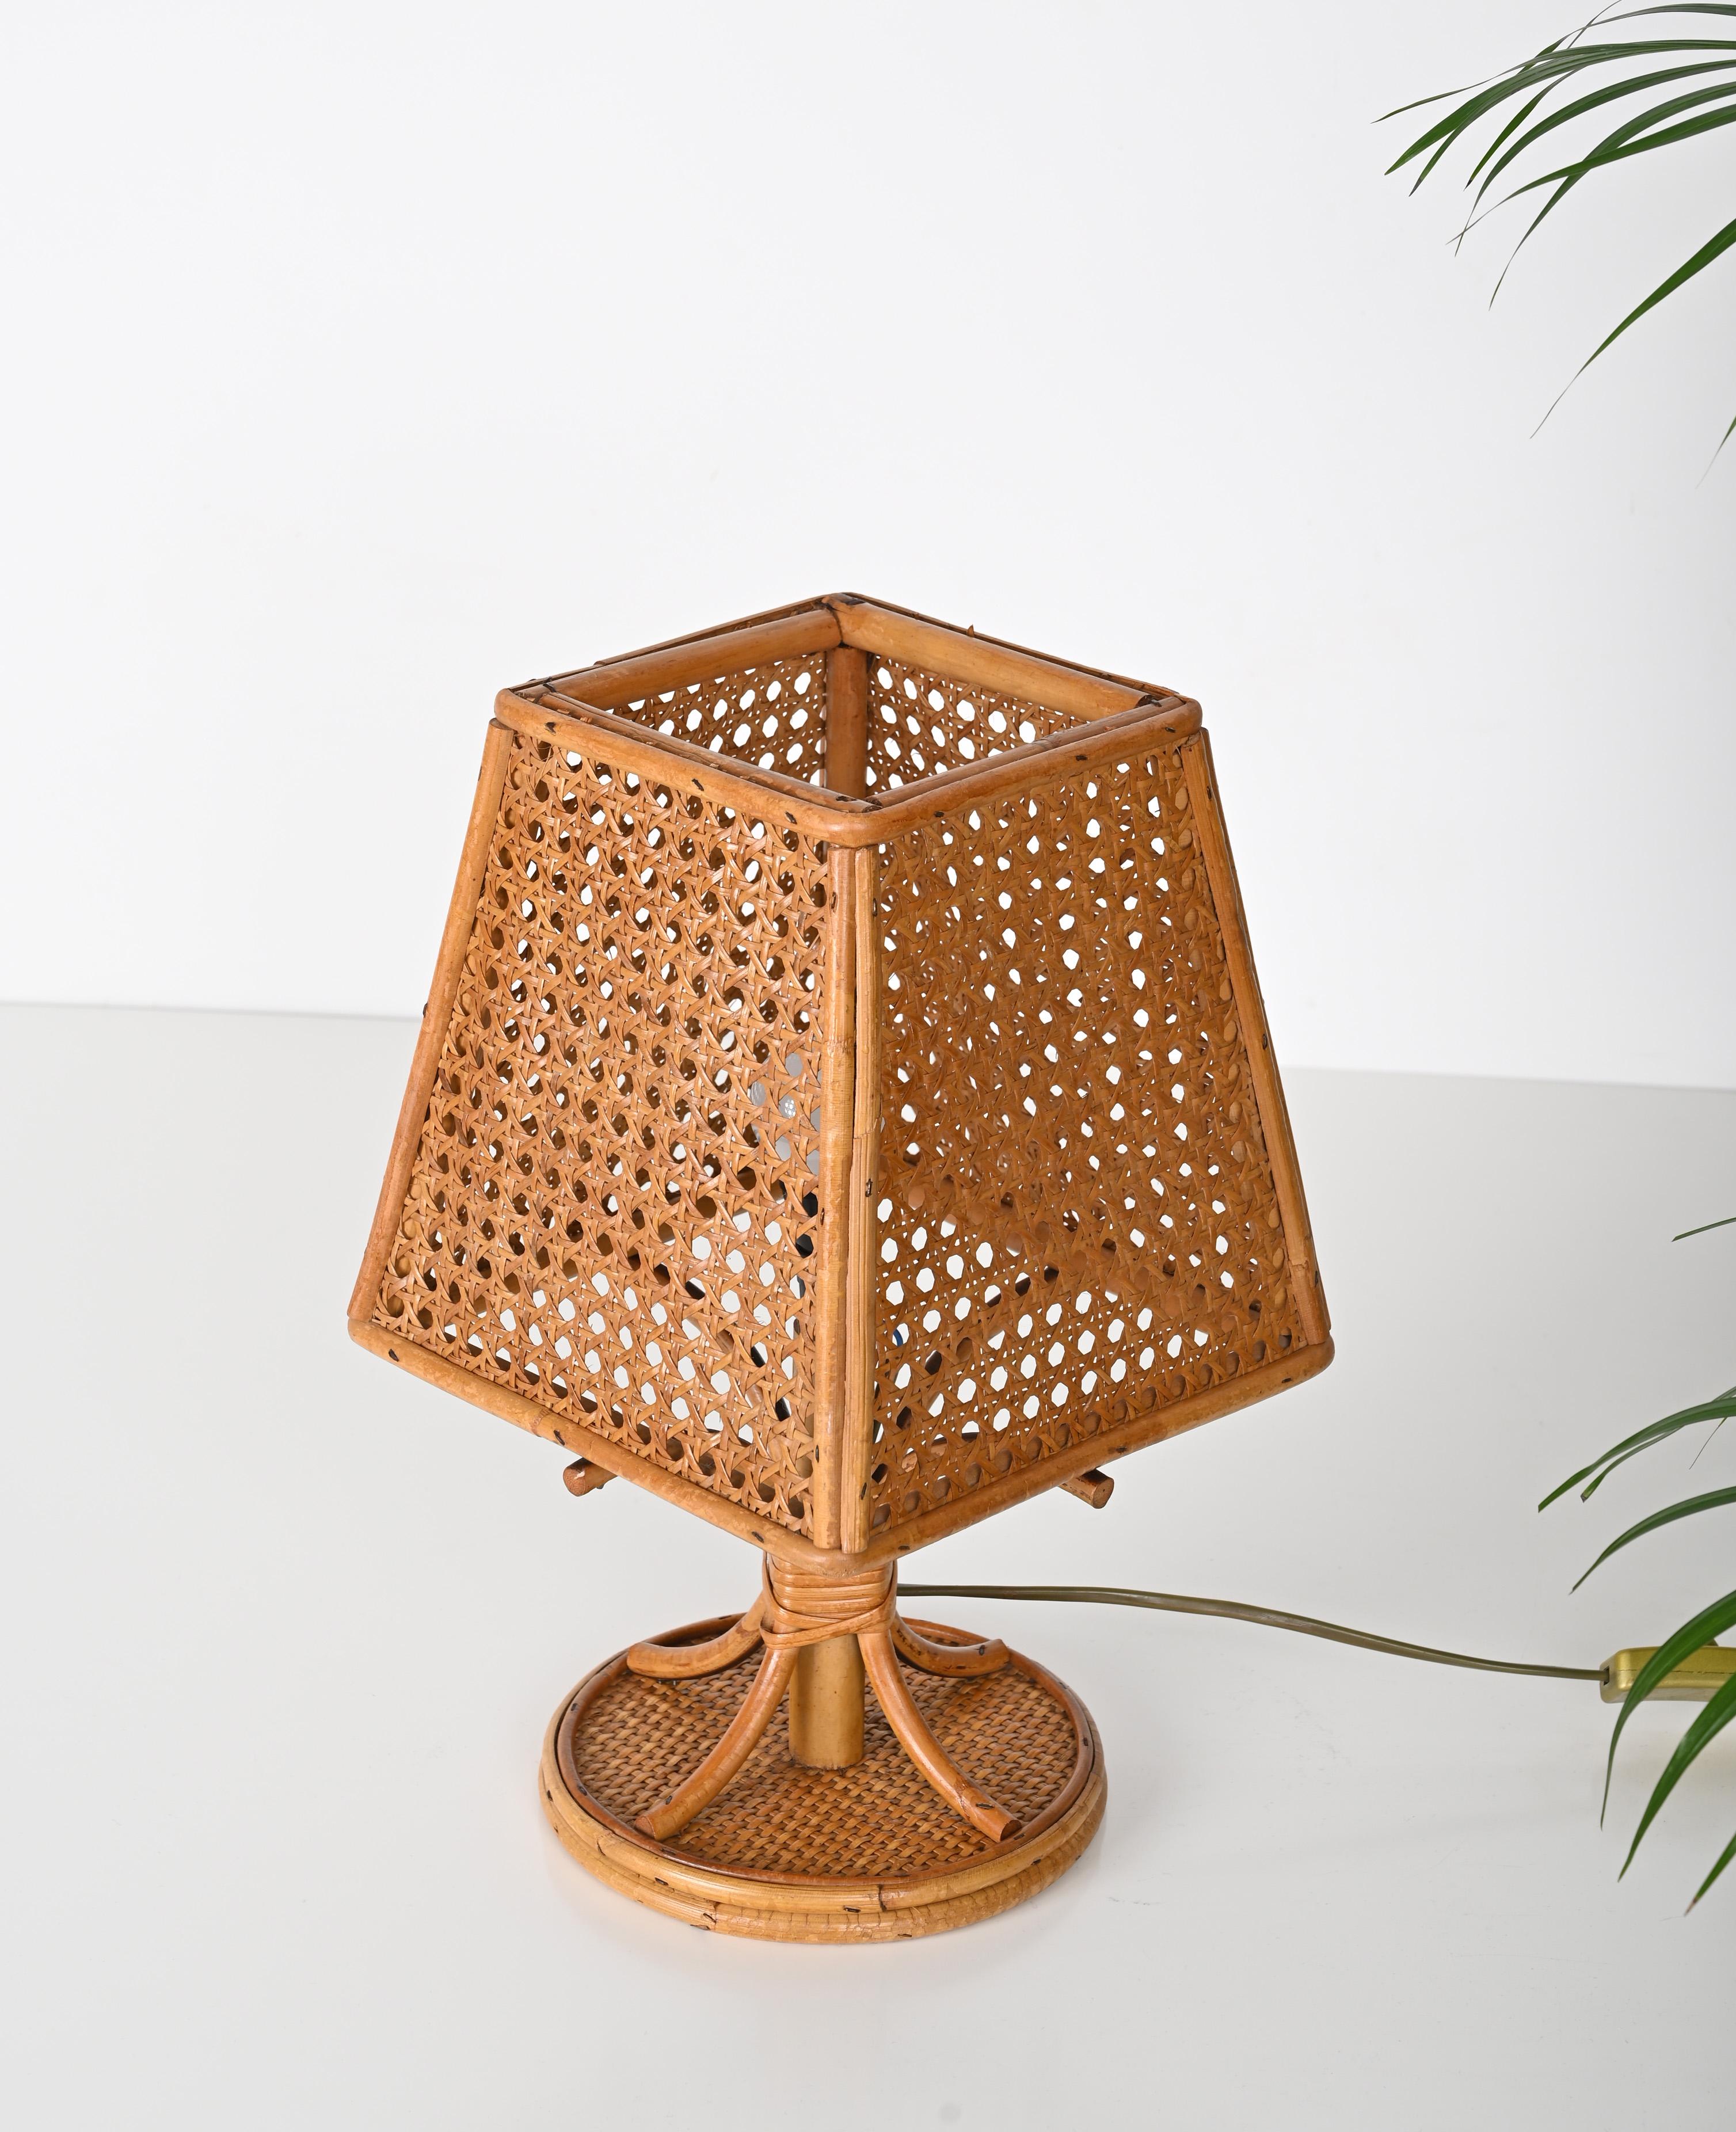 20th Century Pair of French Riviera Table Lamps in Wicker and Rattan, Italy 1960s For Sale